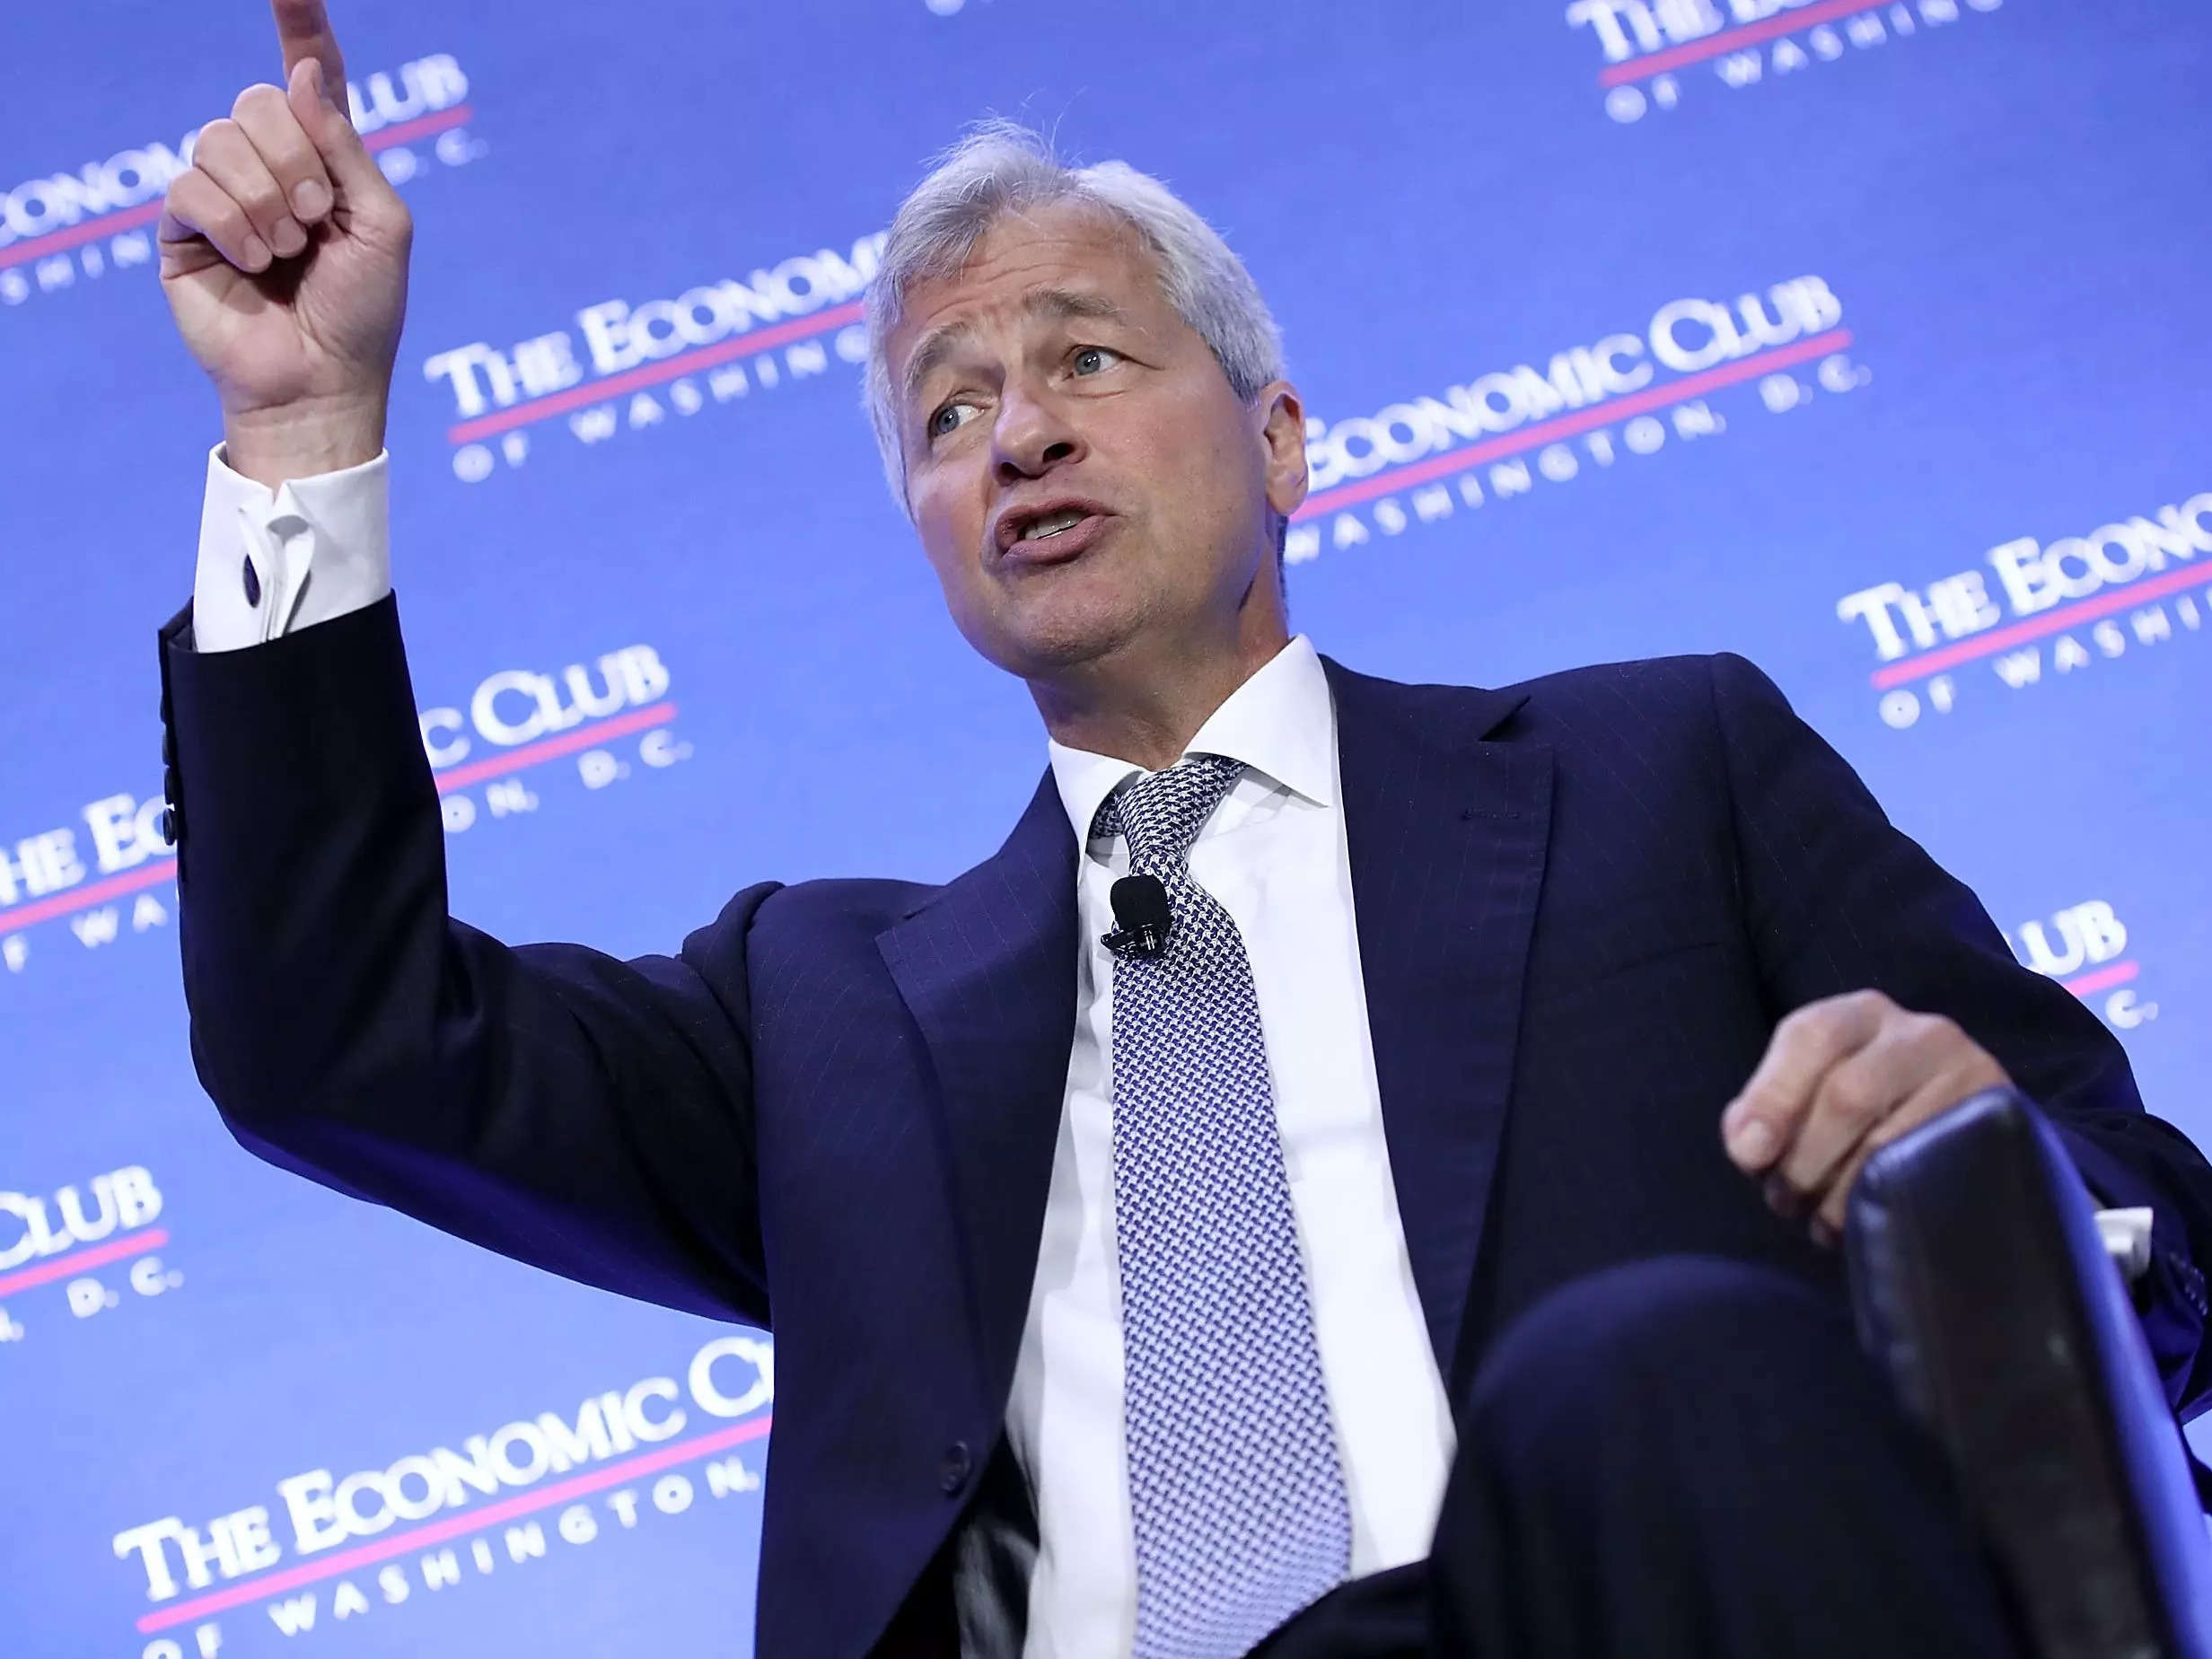 Jamie Dimon’s “gut” tells him the Fed will need to raise rates in the expected 4% to 4.5% range to cool inflation.